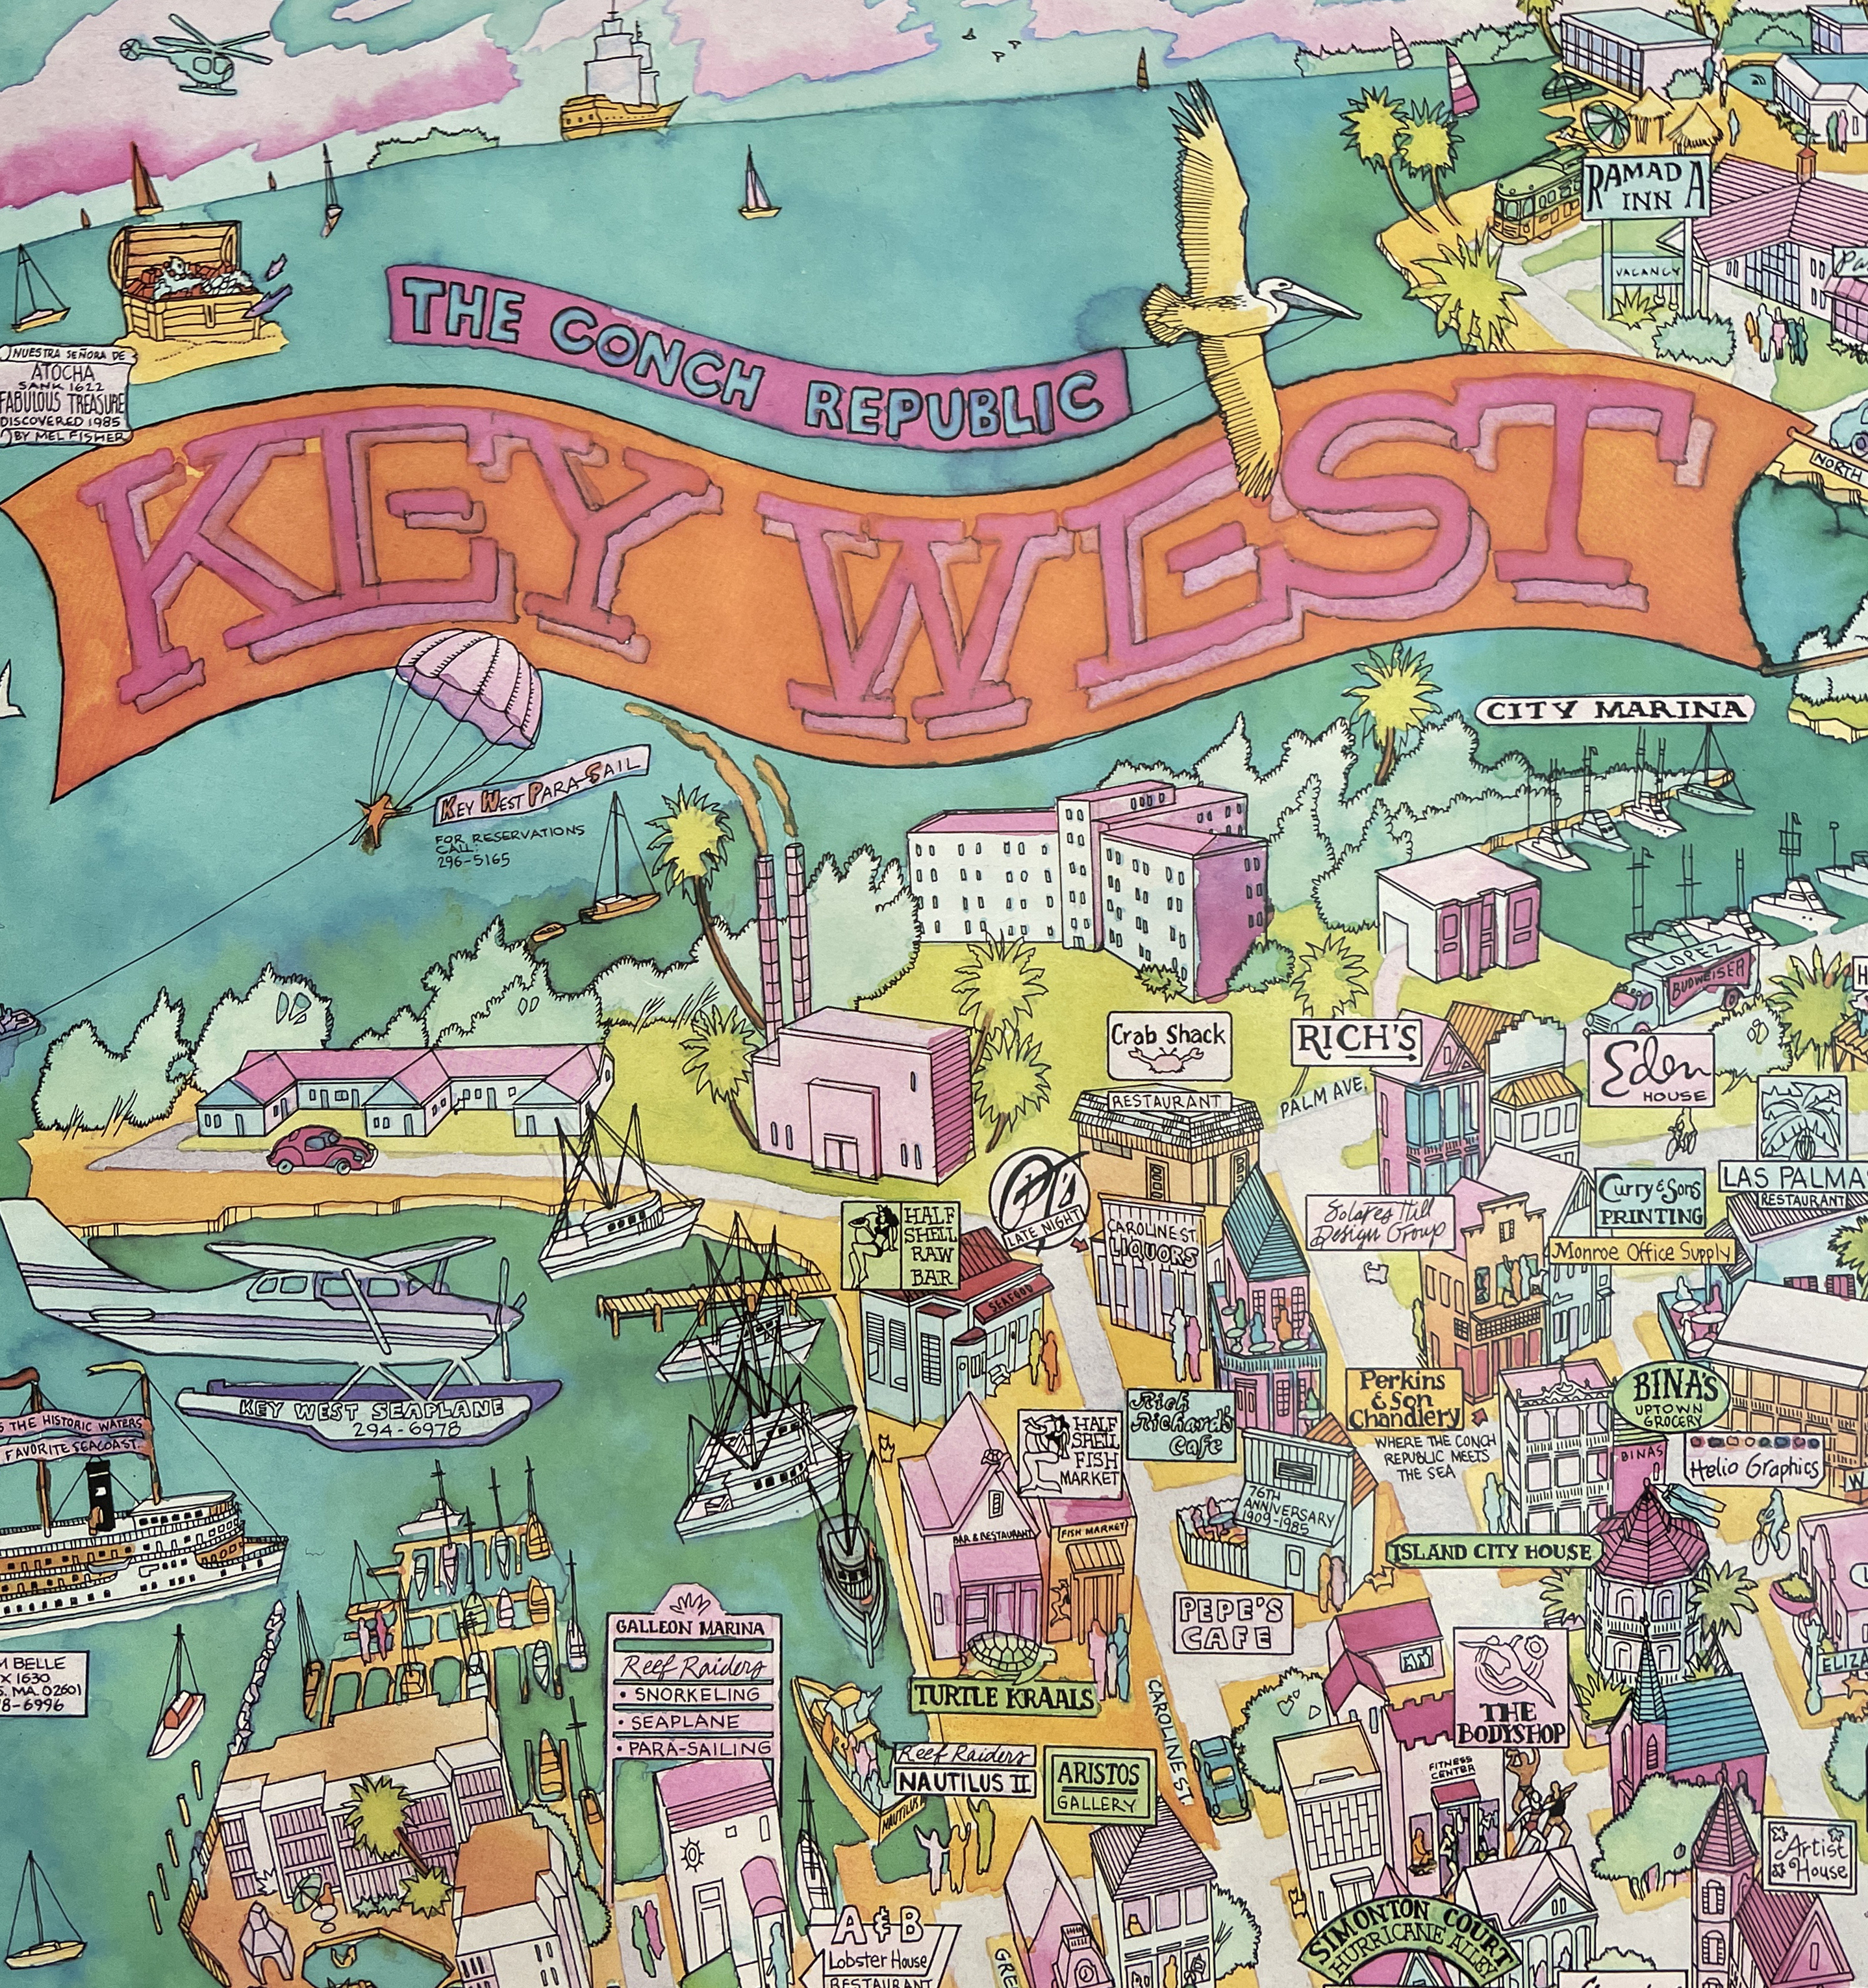 Pictorial advertising map of the  Conch Republic or Key West Florida by Ron Baeza in 1985.